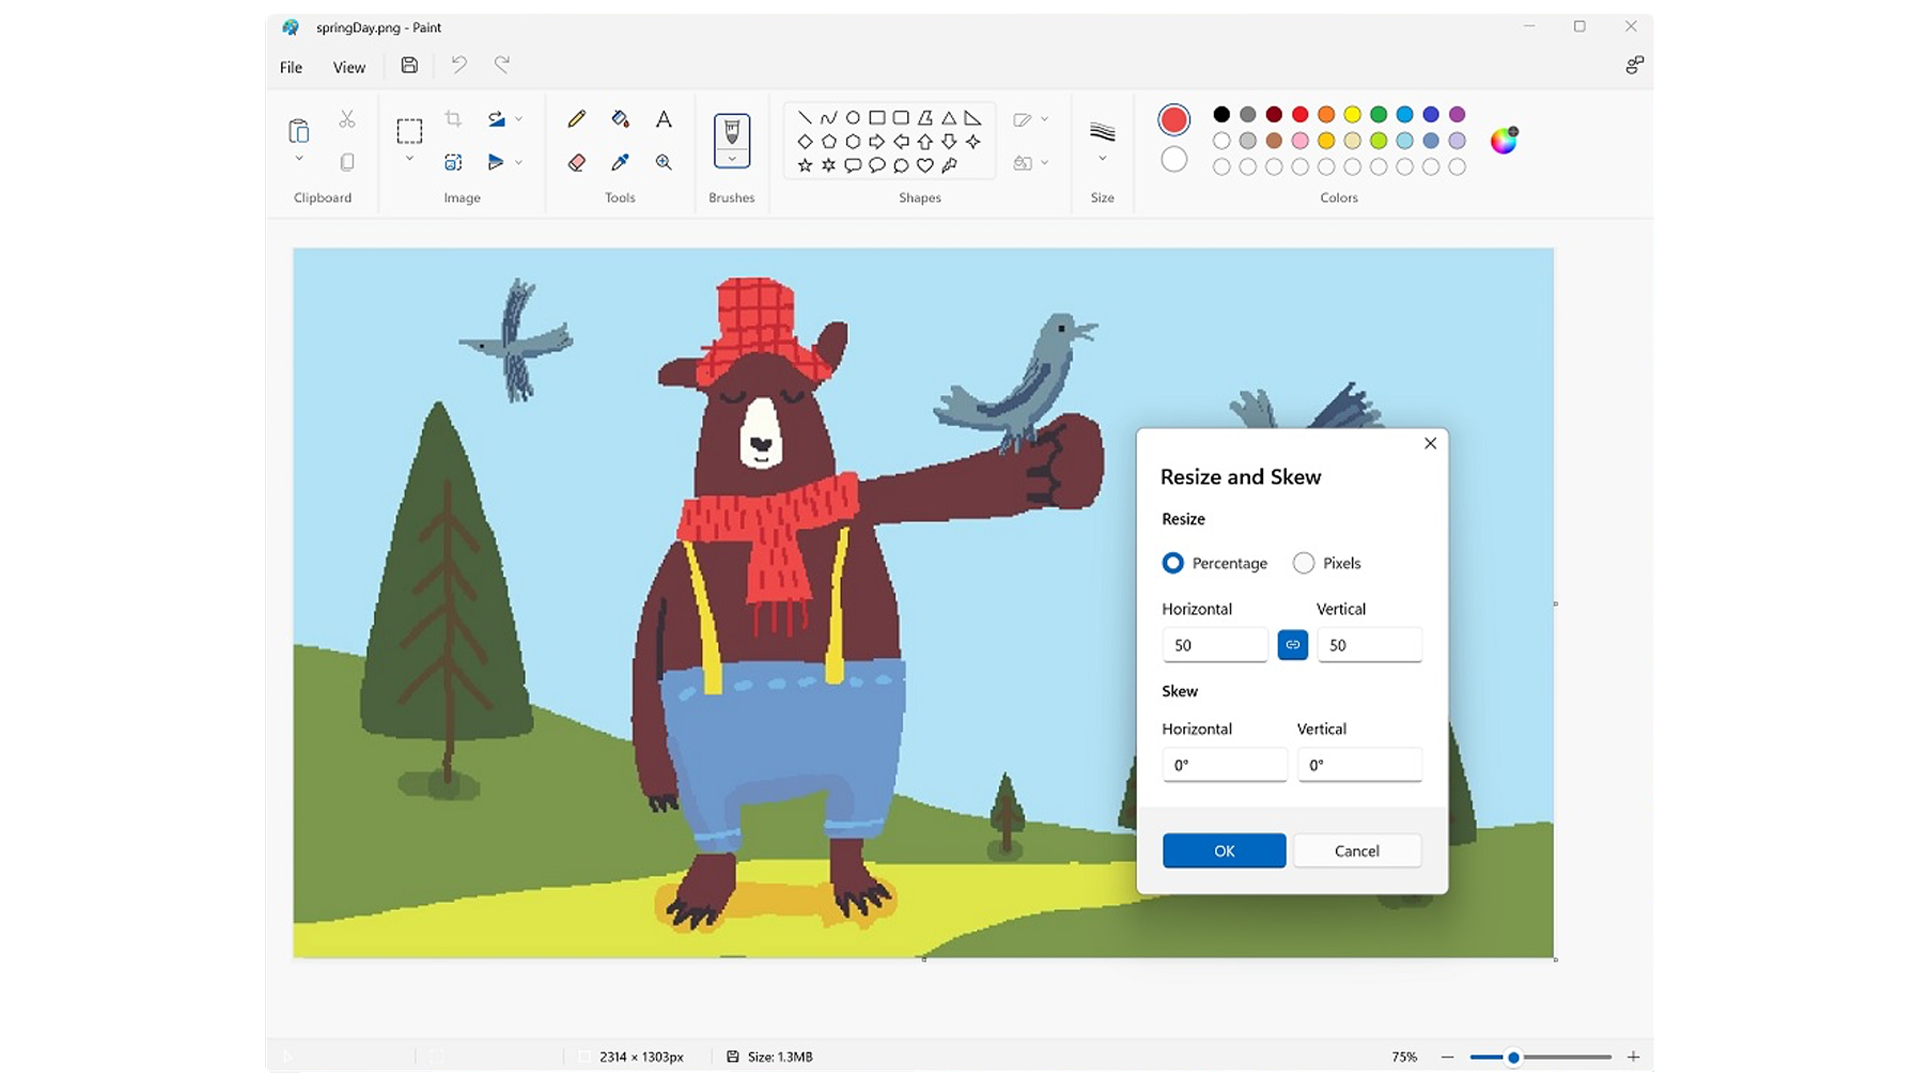 Paint refreshed design in Windows 11